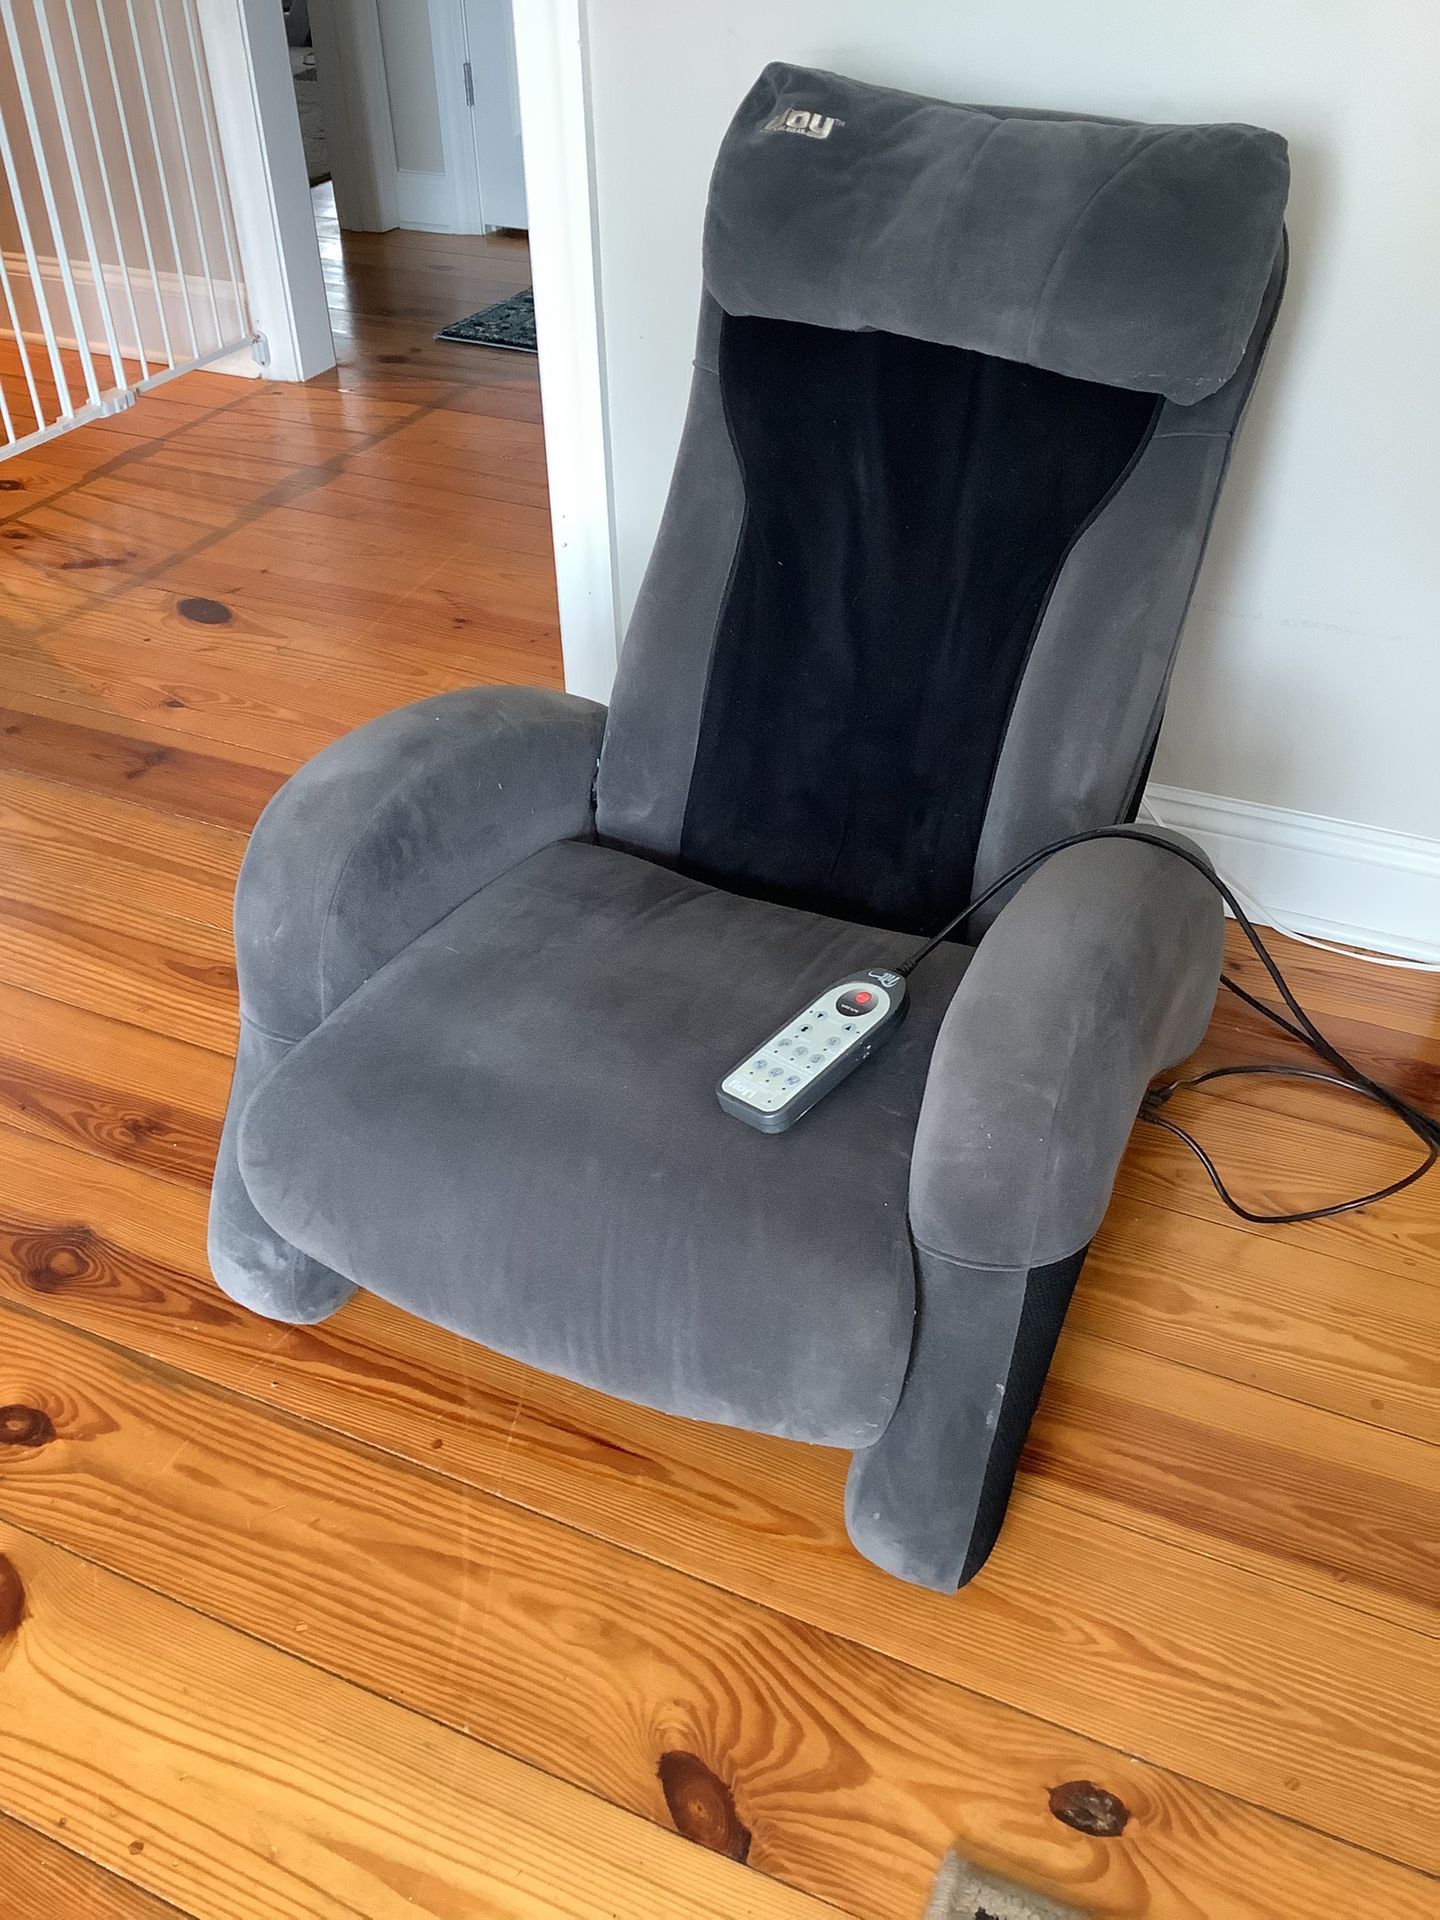 iJoy Massage Chair - Reclines - As Is - Rollers Work But Makes Noise